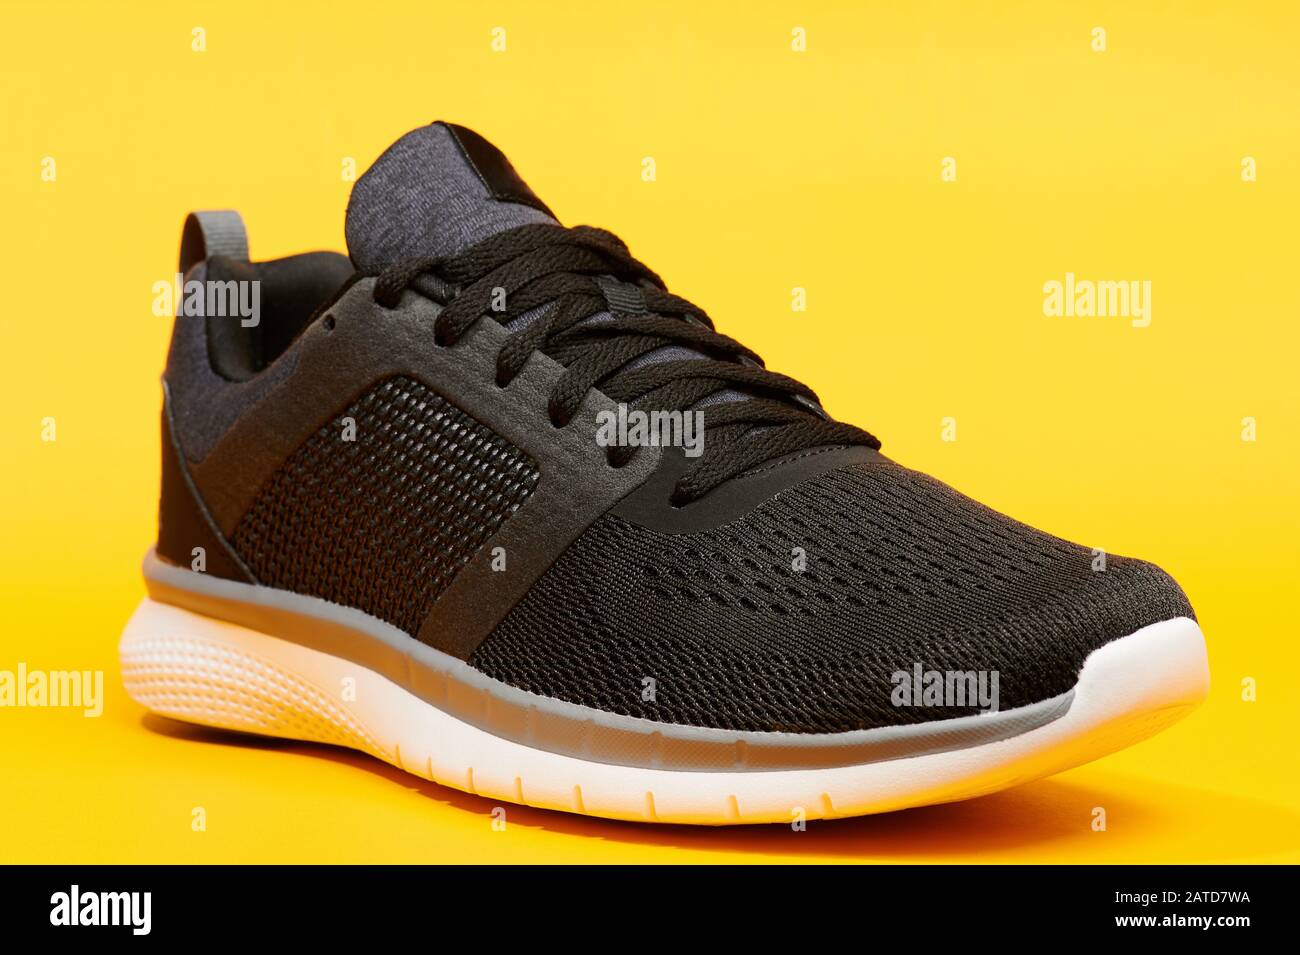 One black running shoe on yellow background close up view Stock Photo